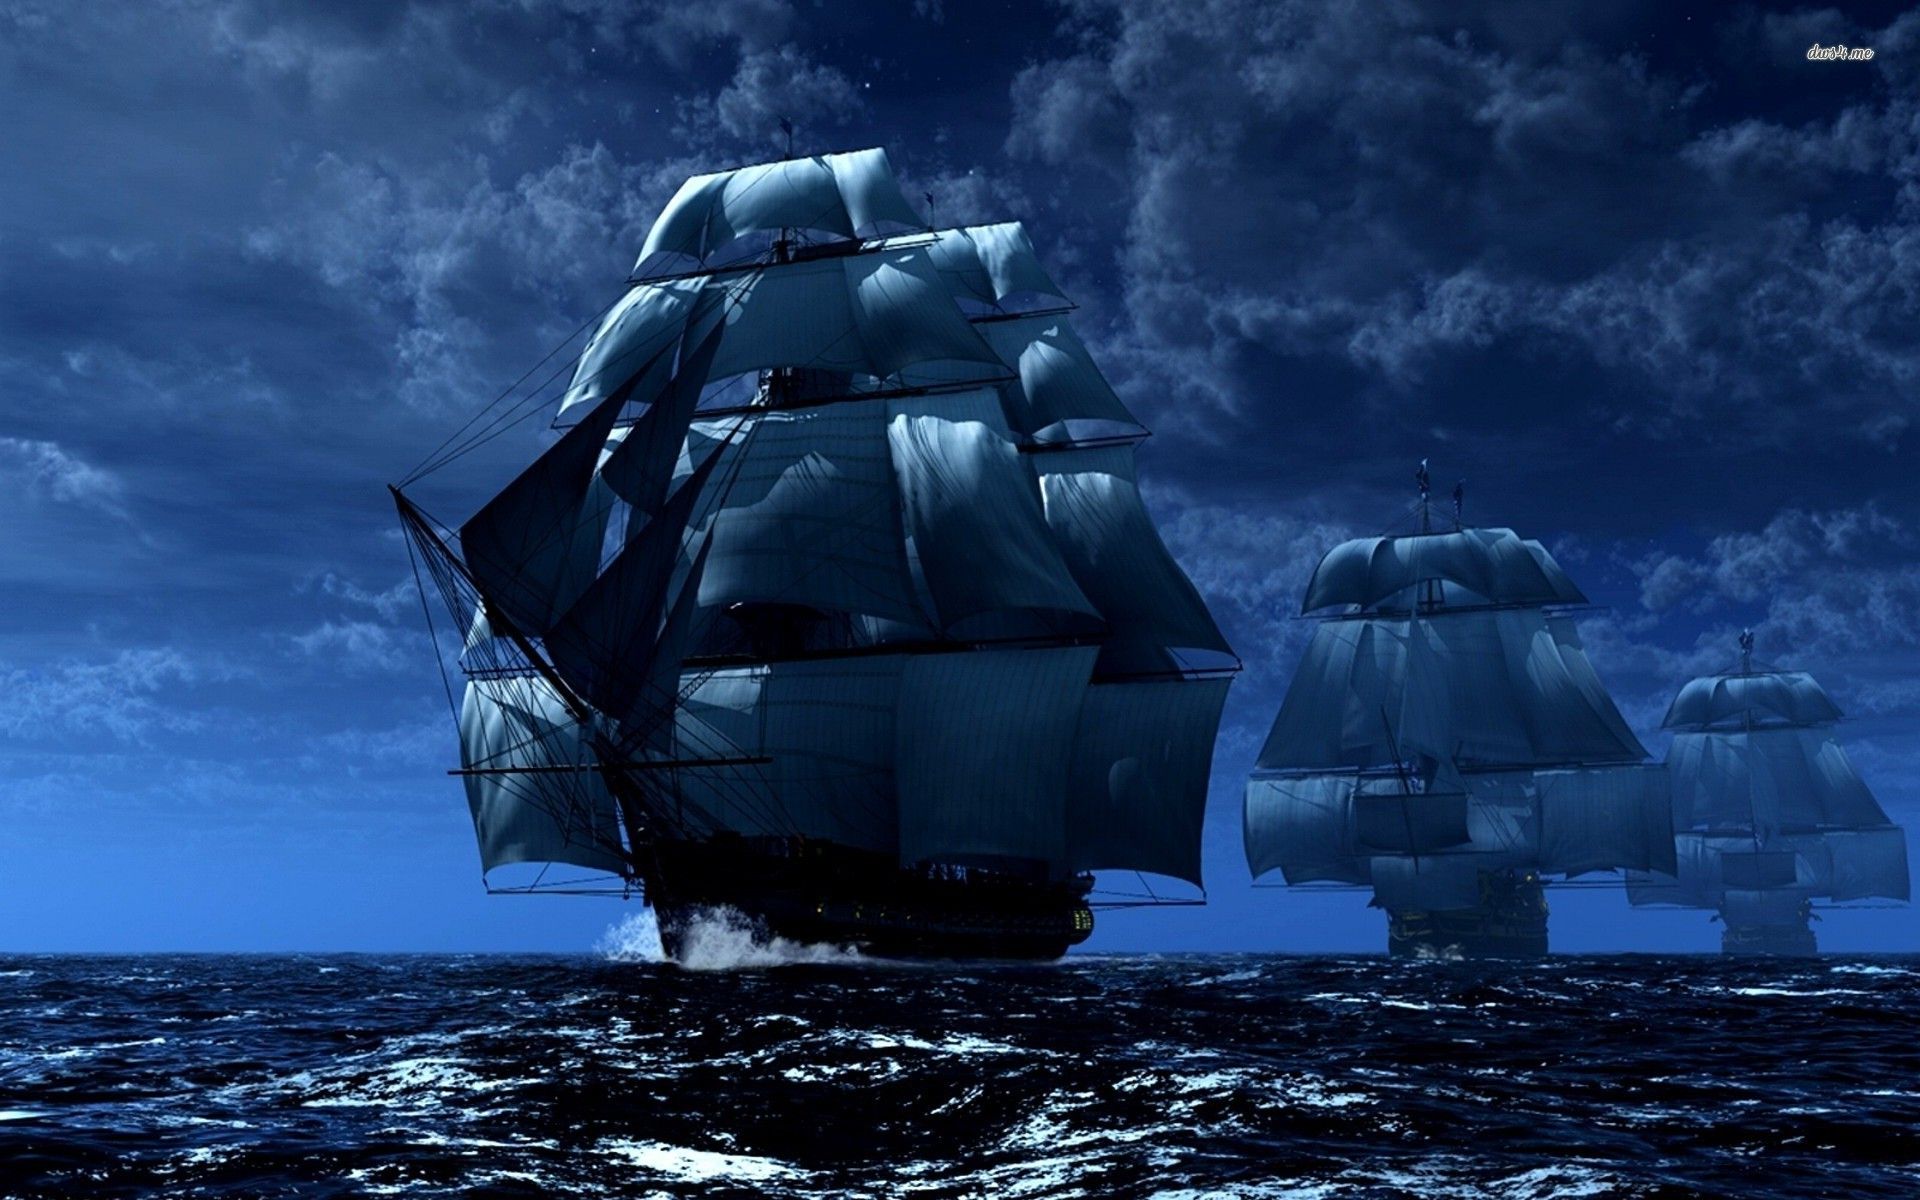 The Black Pearl Wallpapers - Wallpaper Cave